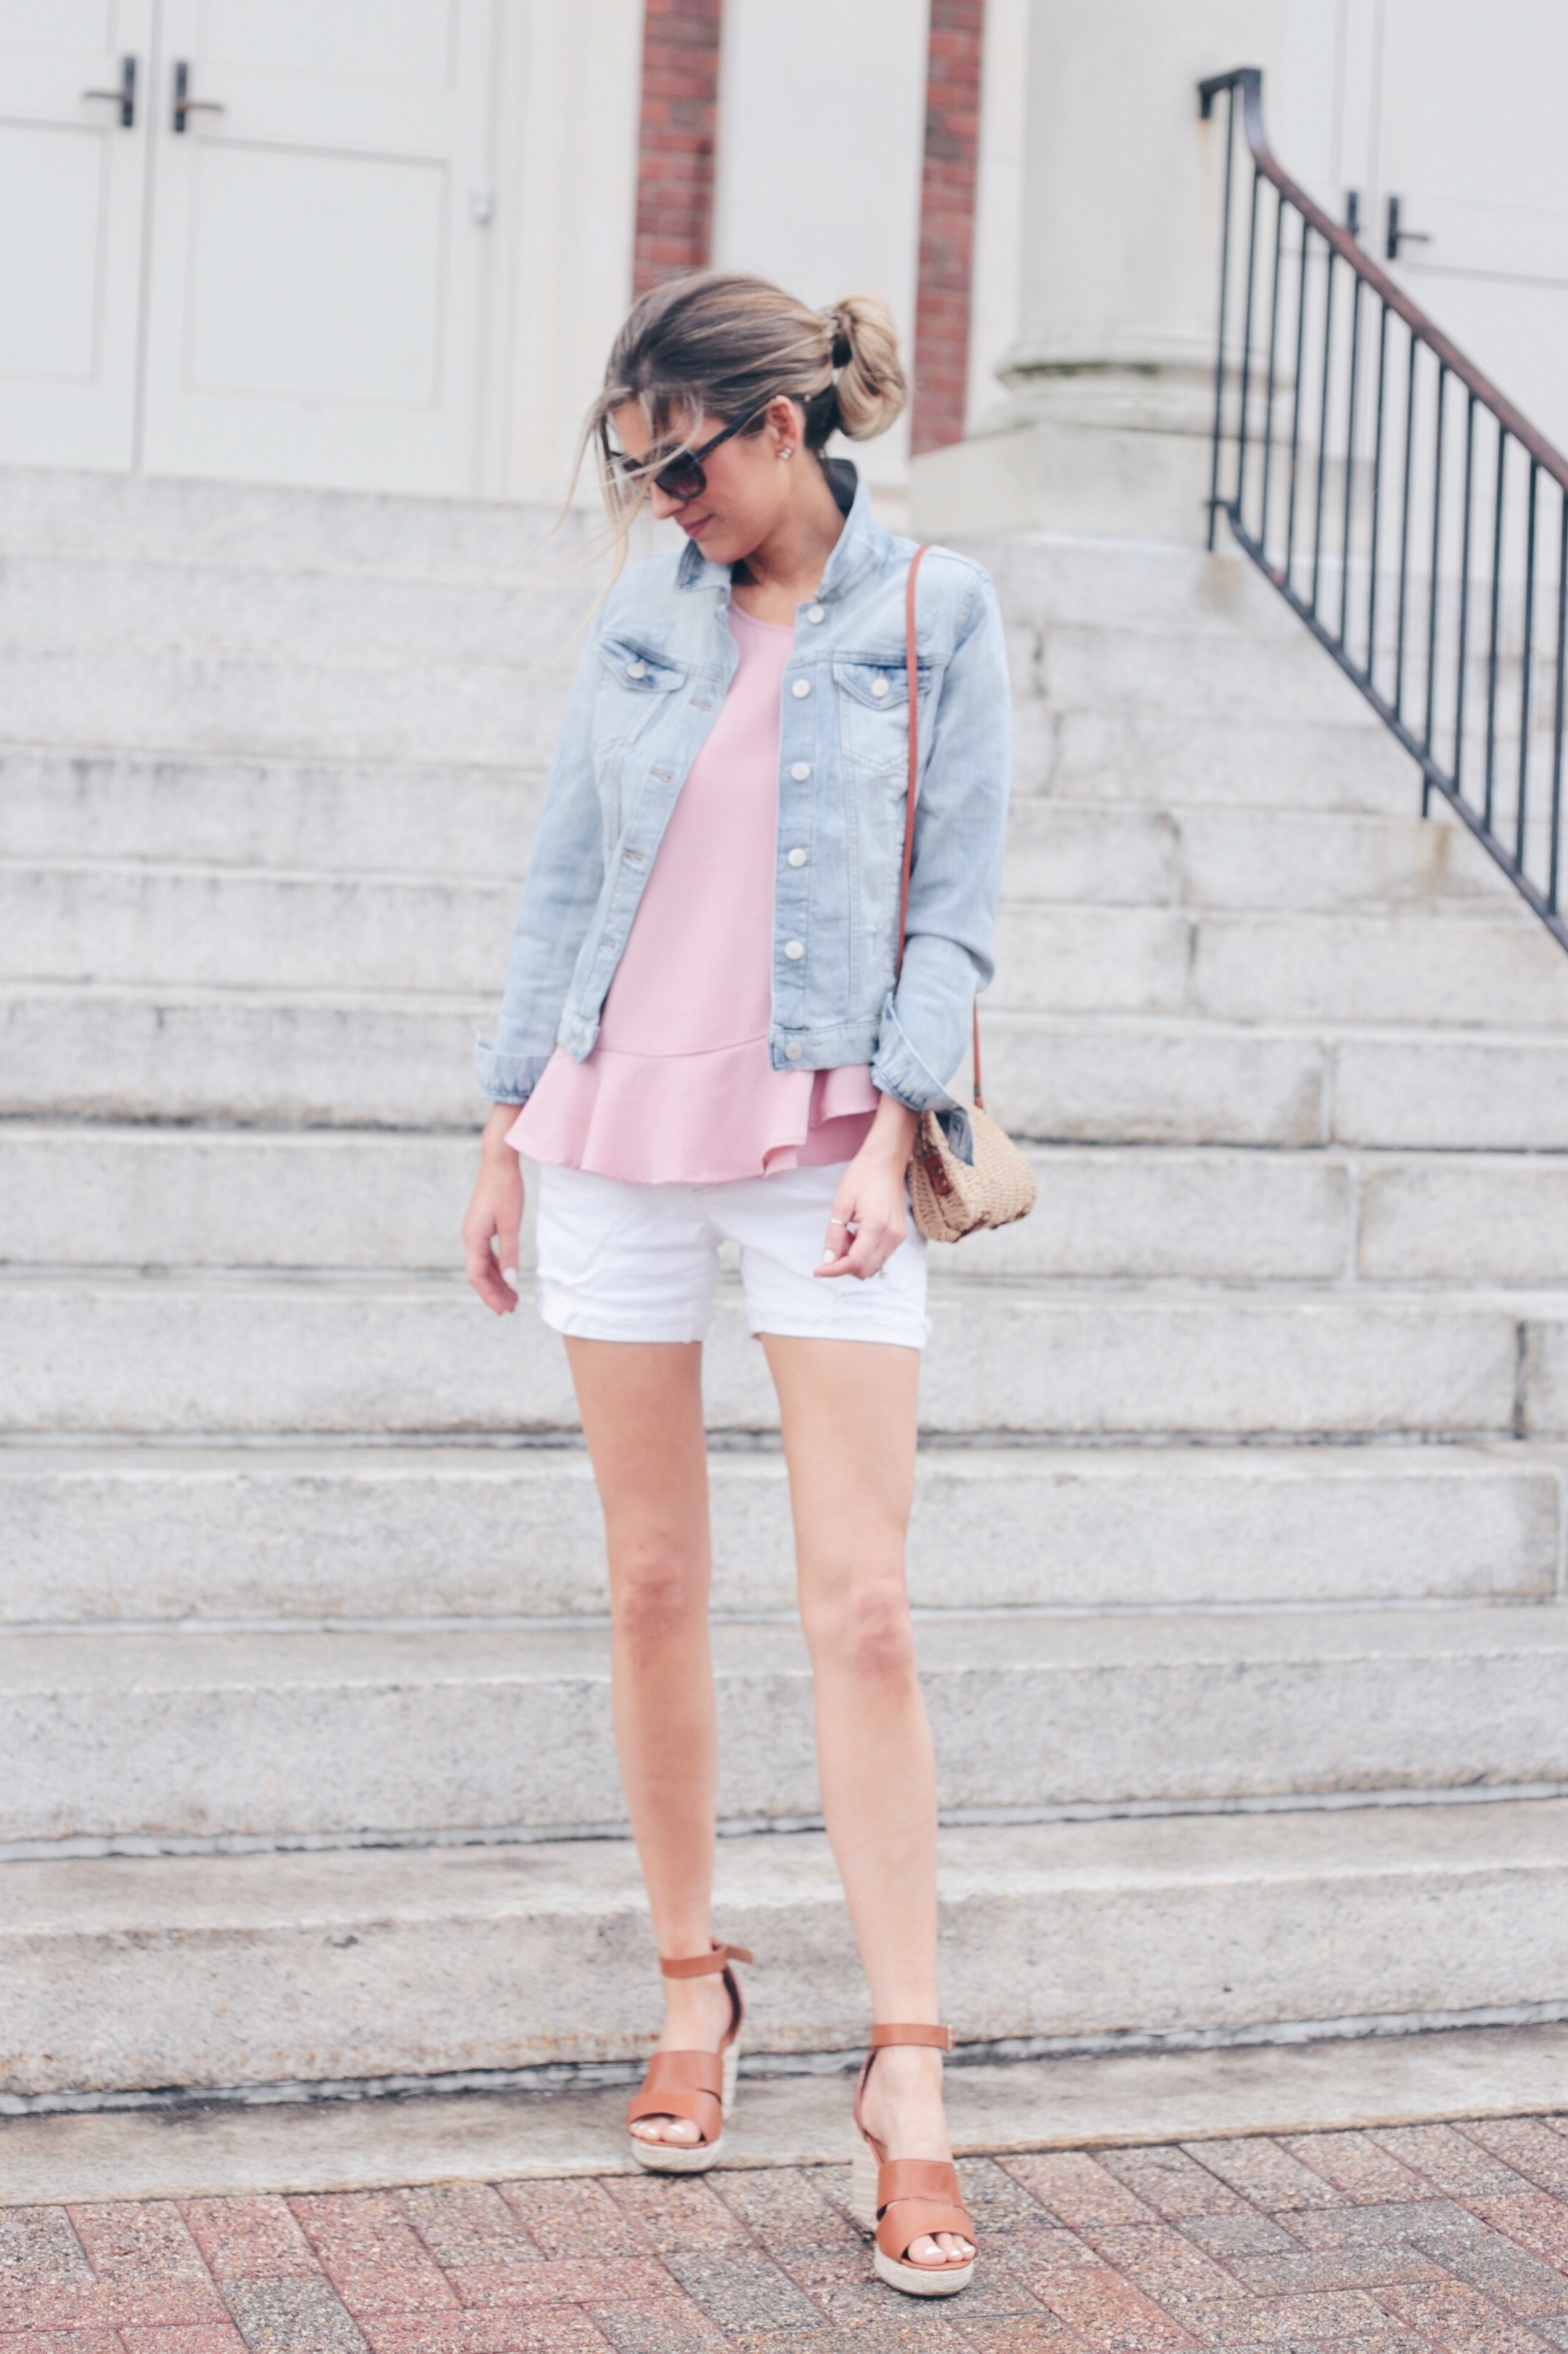 Spring Date Night Outfit Ideas | Jean Jacket and White SHorts